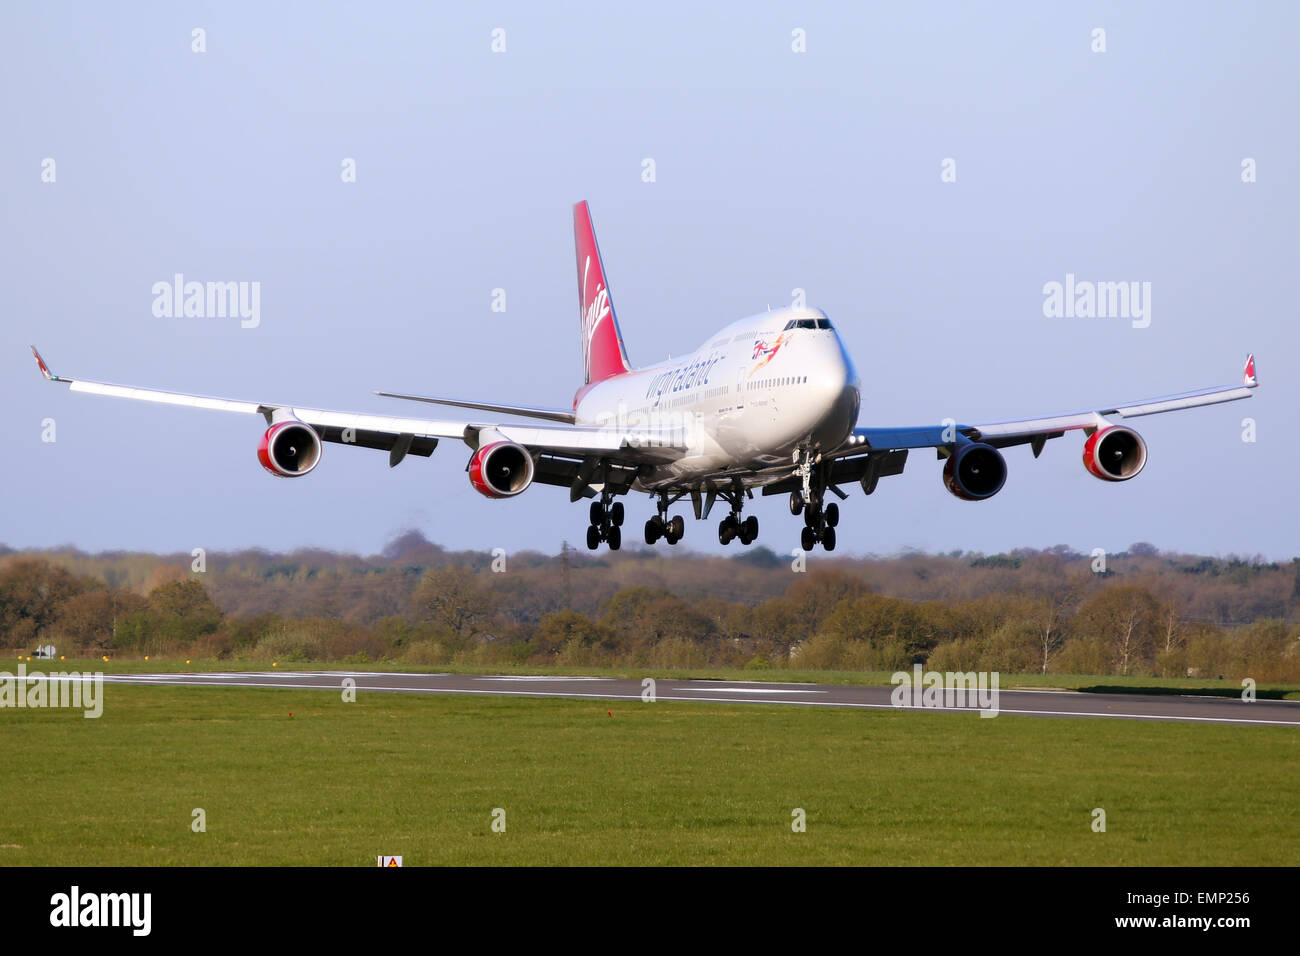 Virgin Atlantic Boeing 747-400 approaches runway 05R at Manchester airport. Stock Photo